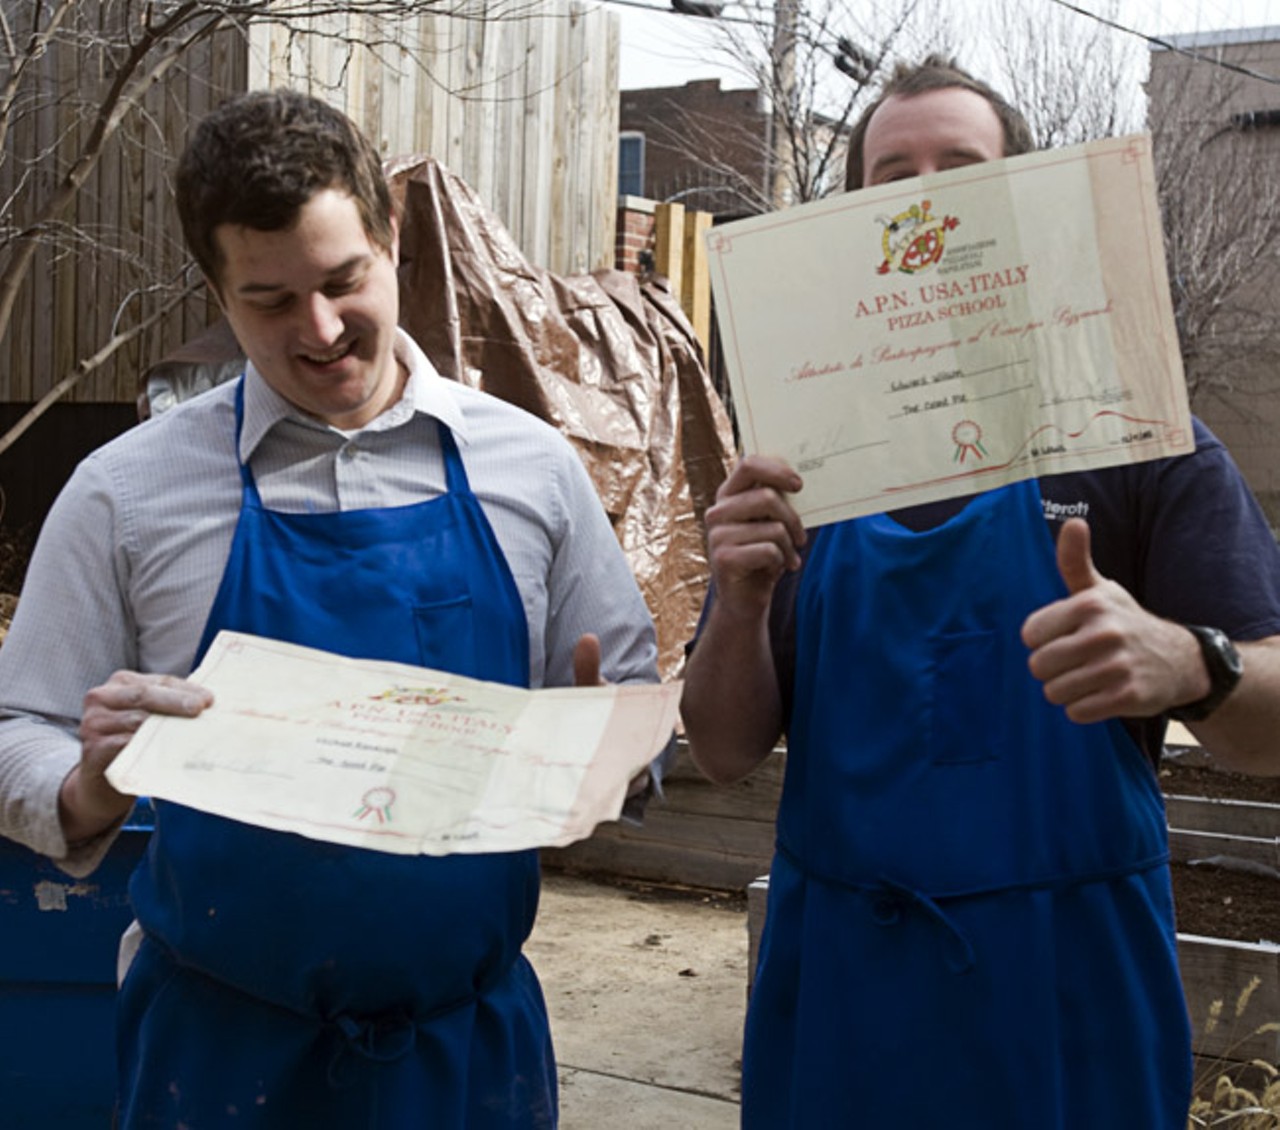 On left, mike Randolph with Ted Wilson, follow trained and certified pizzaiuolos!Crust Achin': Ian ventures forth in search of the good pizza and finds the Good Pie